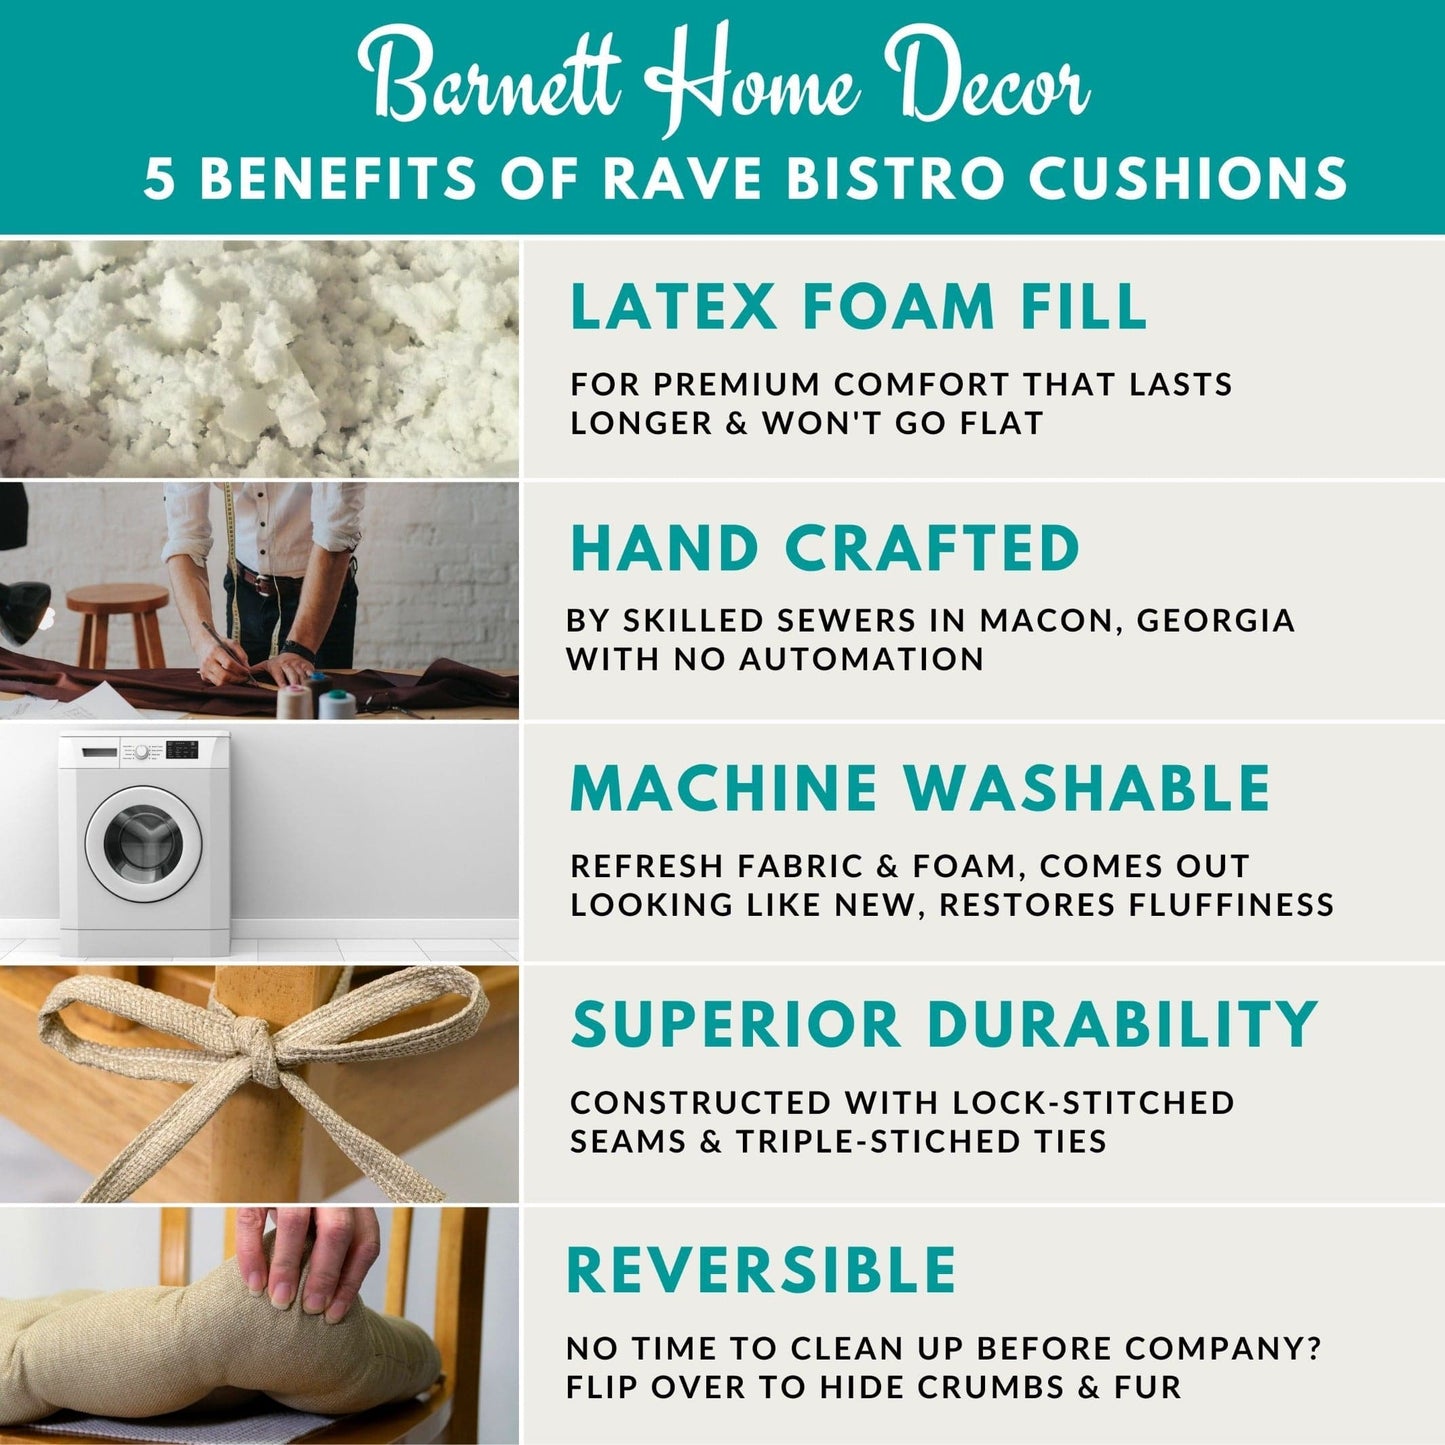 Barnett Home Decor Benefits of Rave Bistro Cushions - Latex Foam Fill, Hand Crafted, Machine Washable, Superior Durability, Reversible